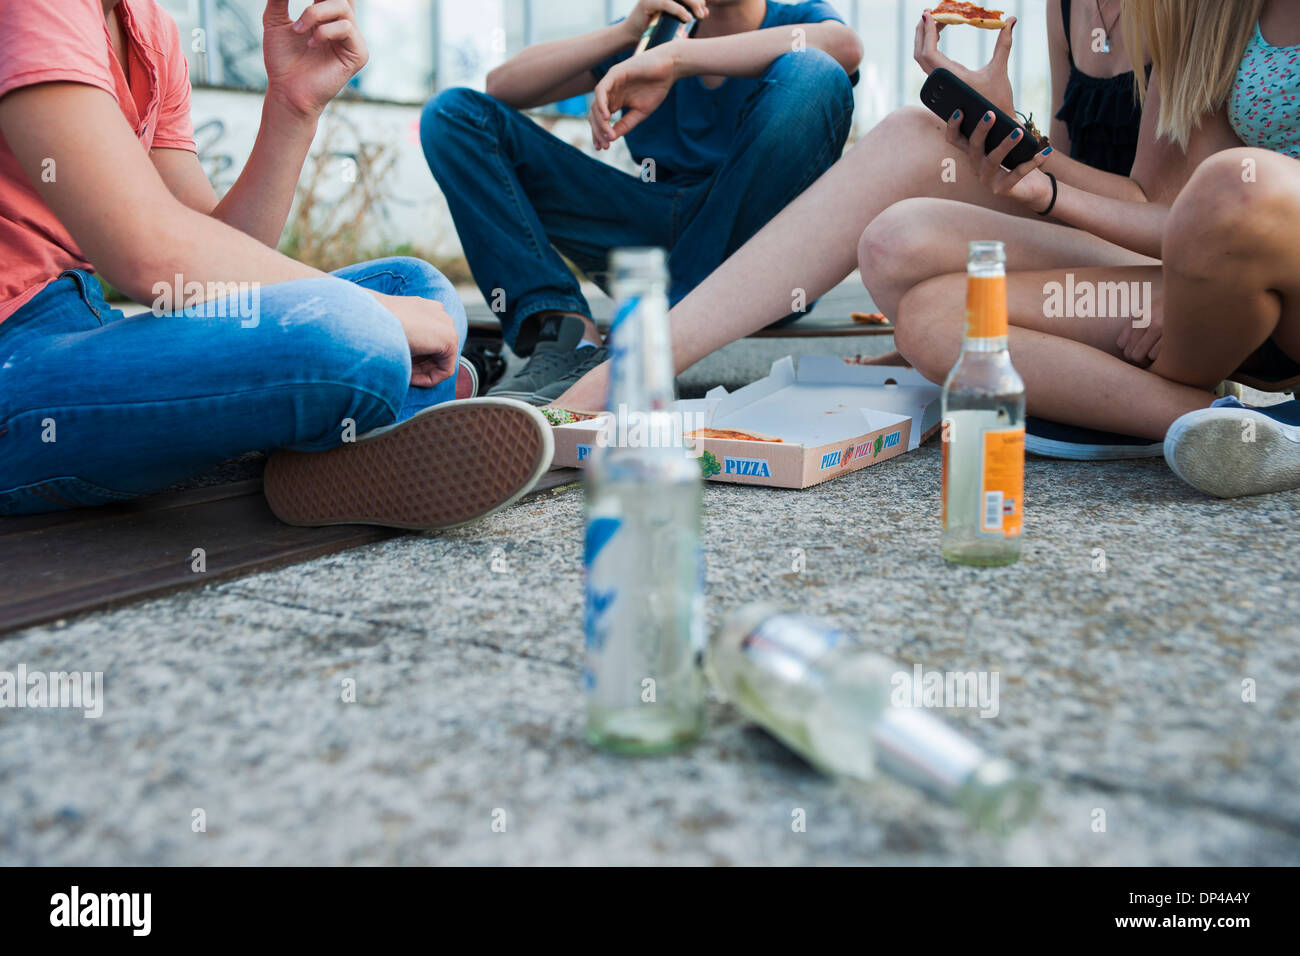 Surface level view of Group of teenagers sitting on ground outdoors, eating pizza and hanging out, Germany Stock Photo